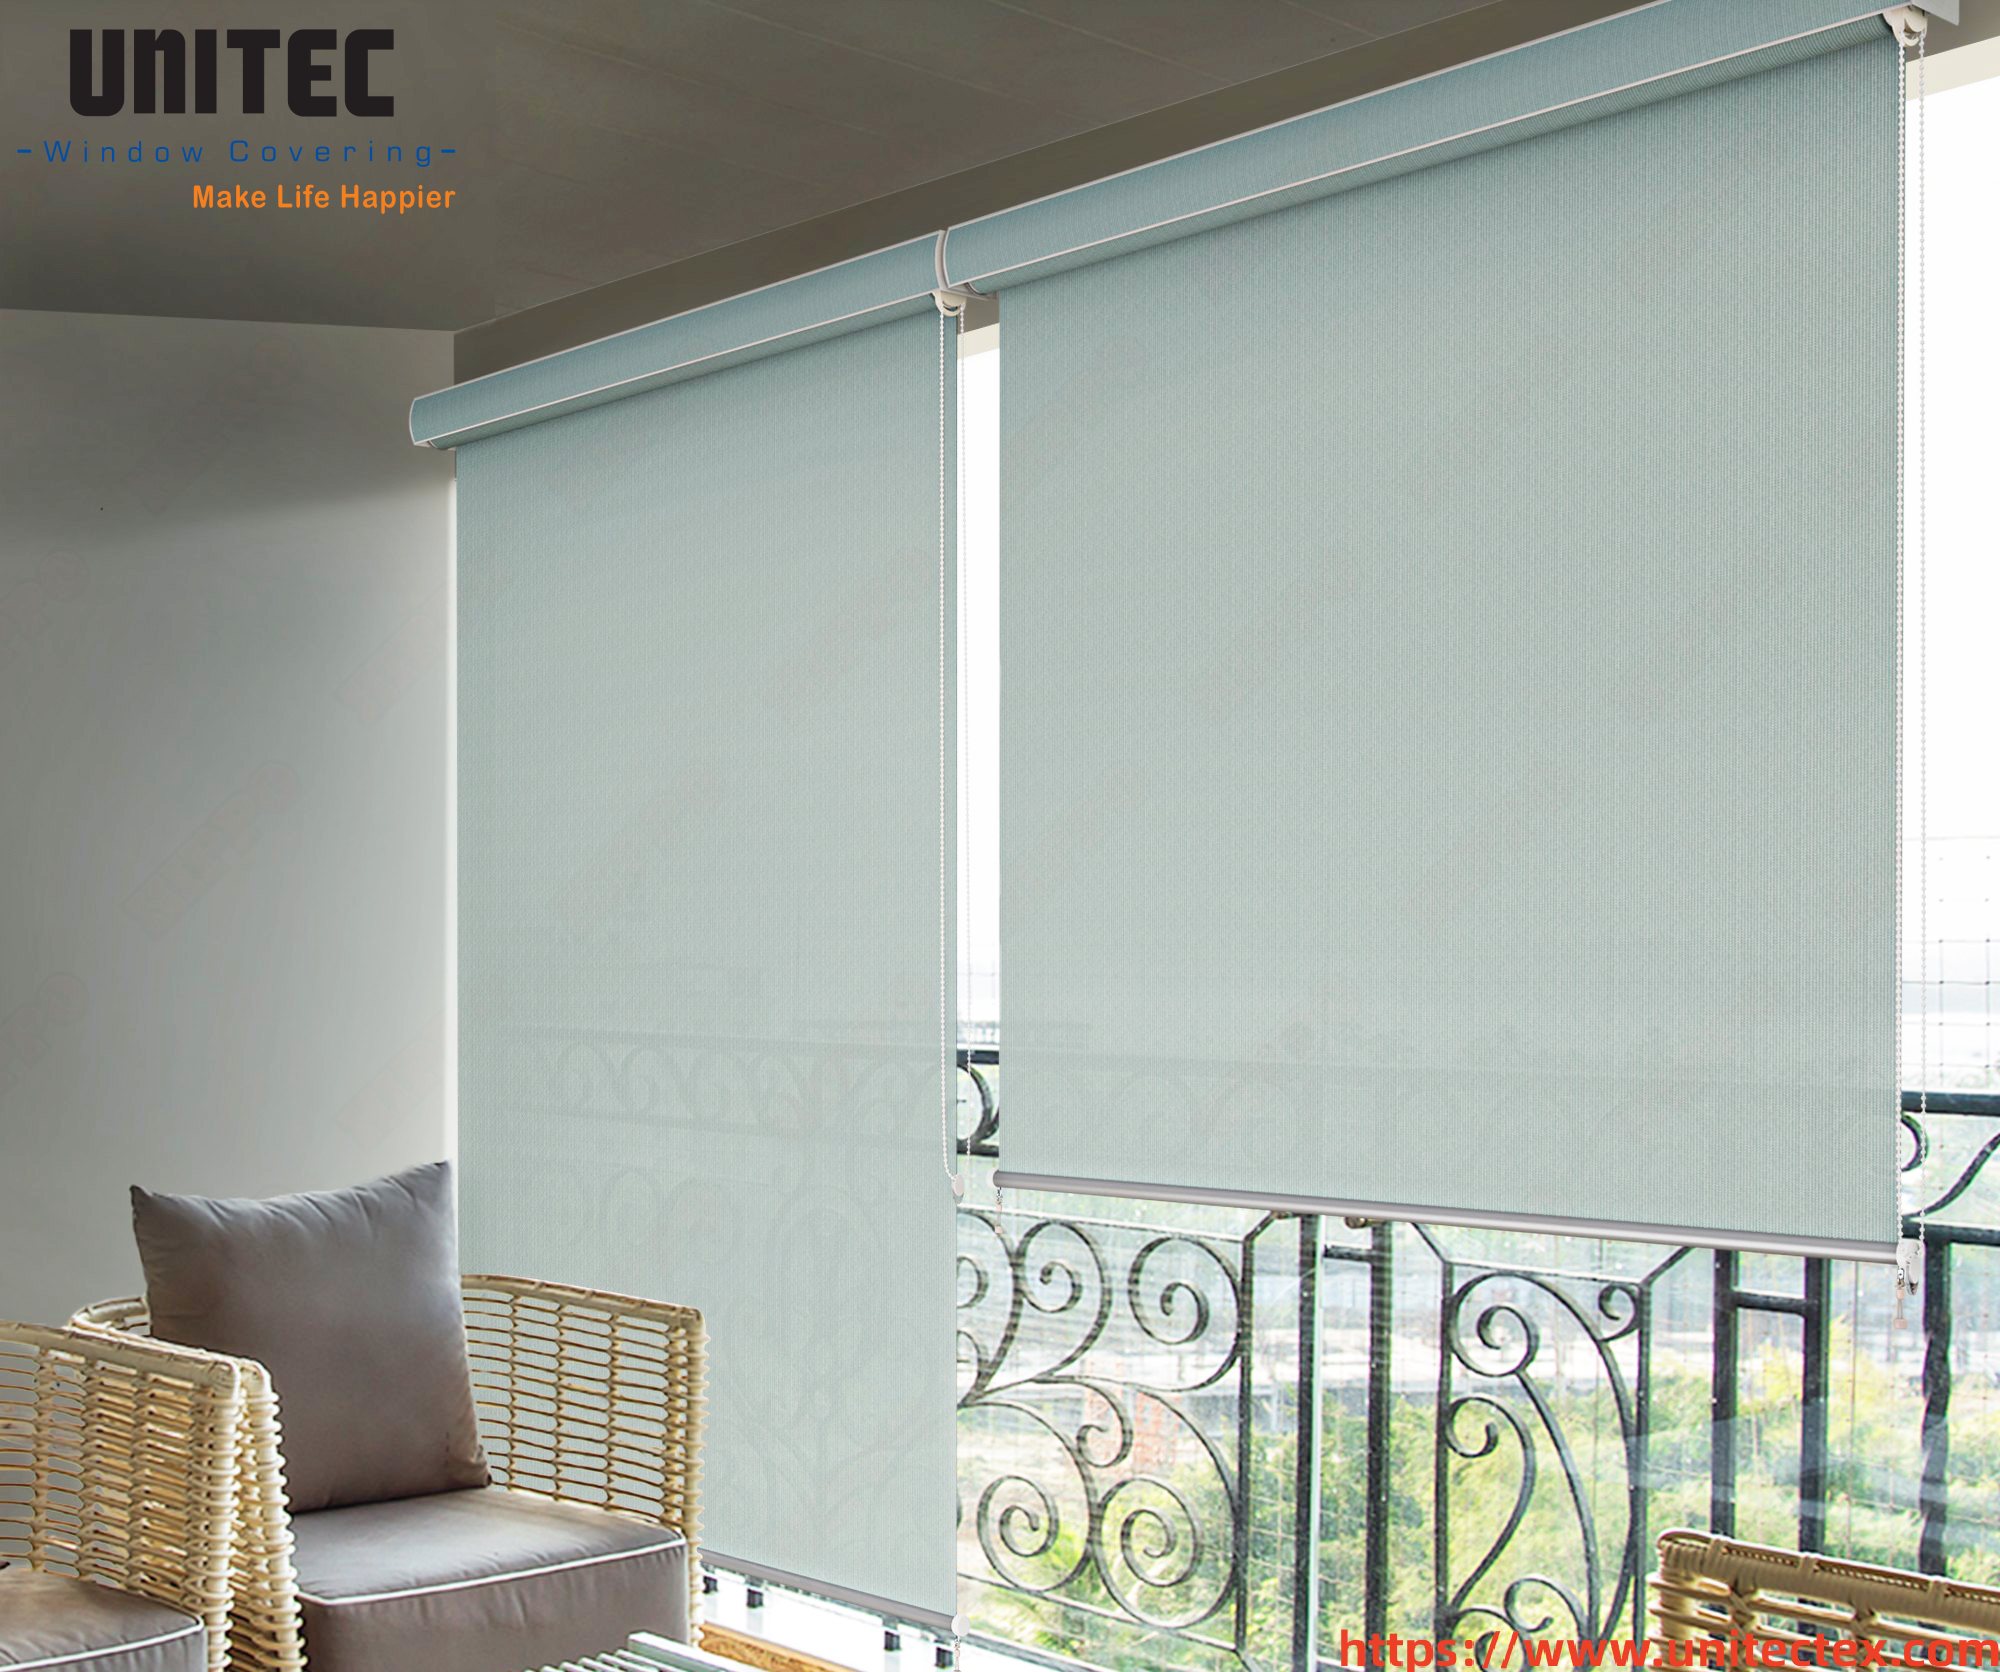 Do you know these advantages of the exterior window blinds？